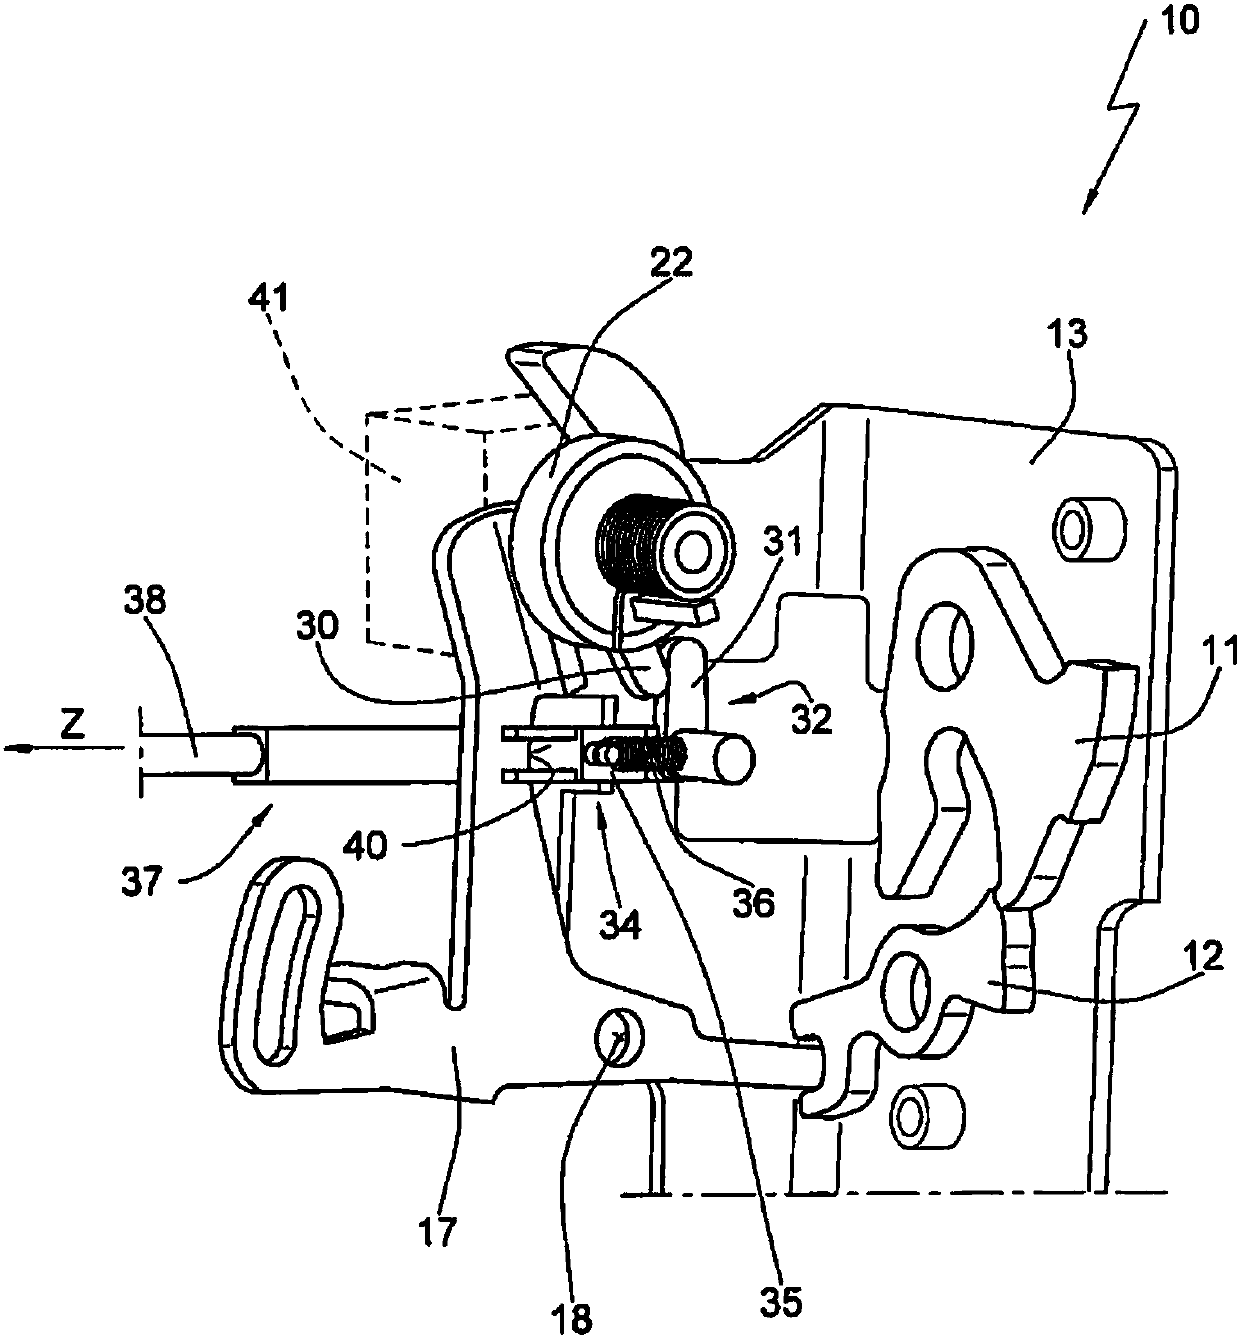 Locking device for a vehicle door, and method